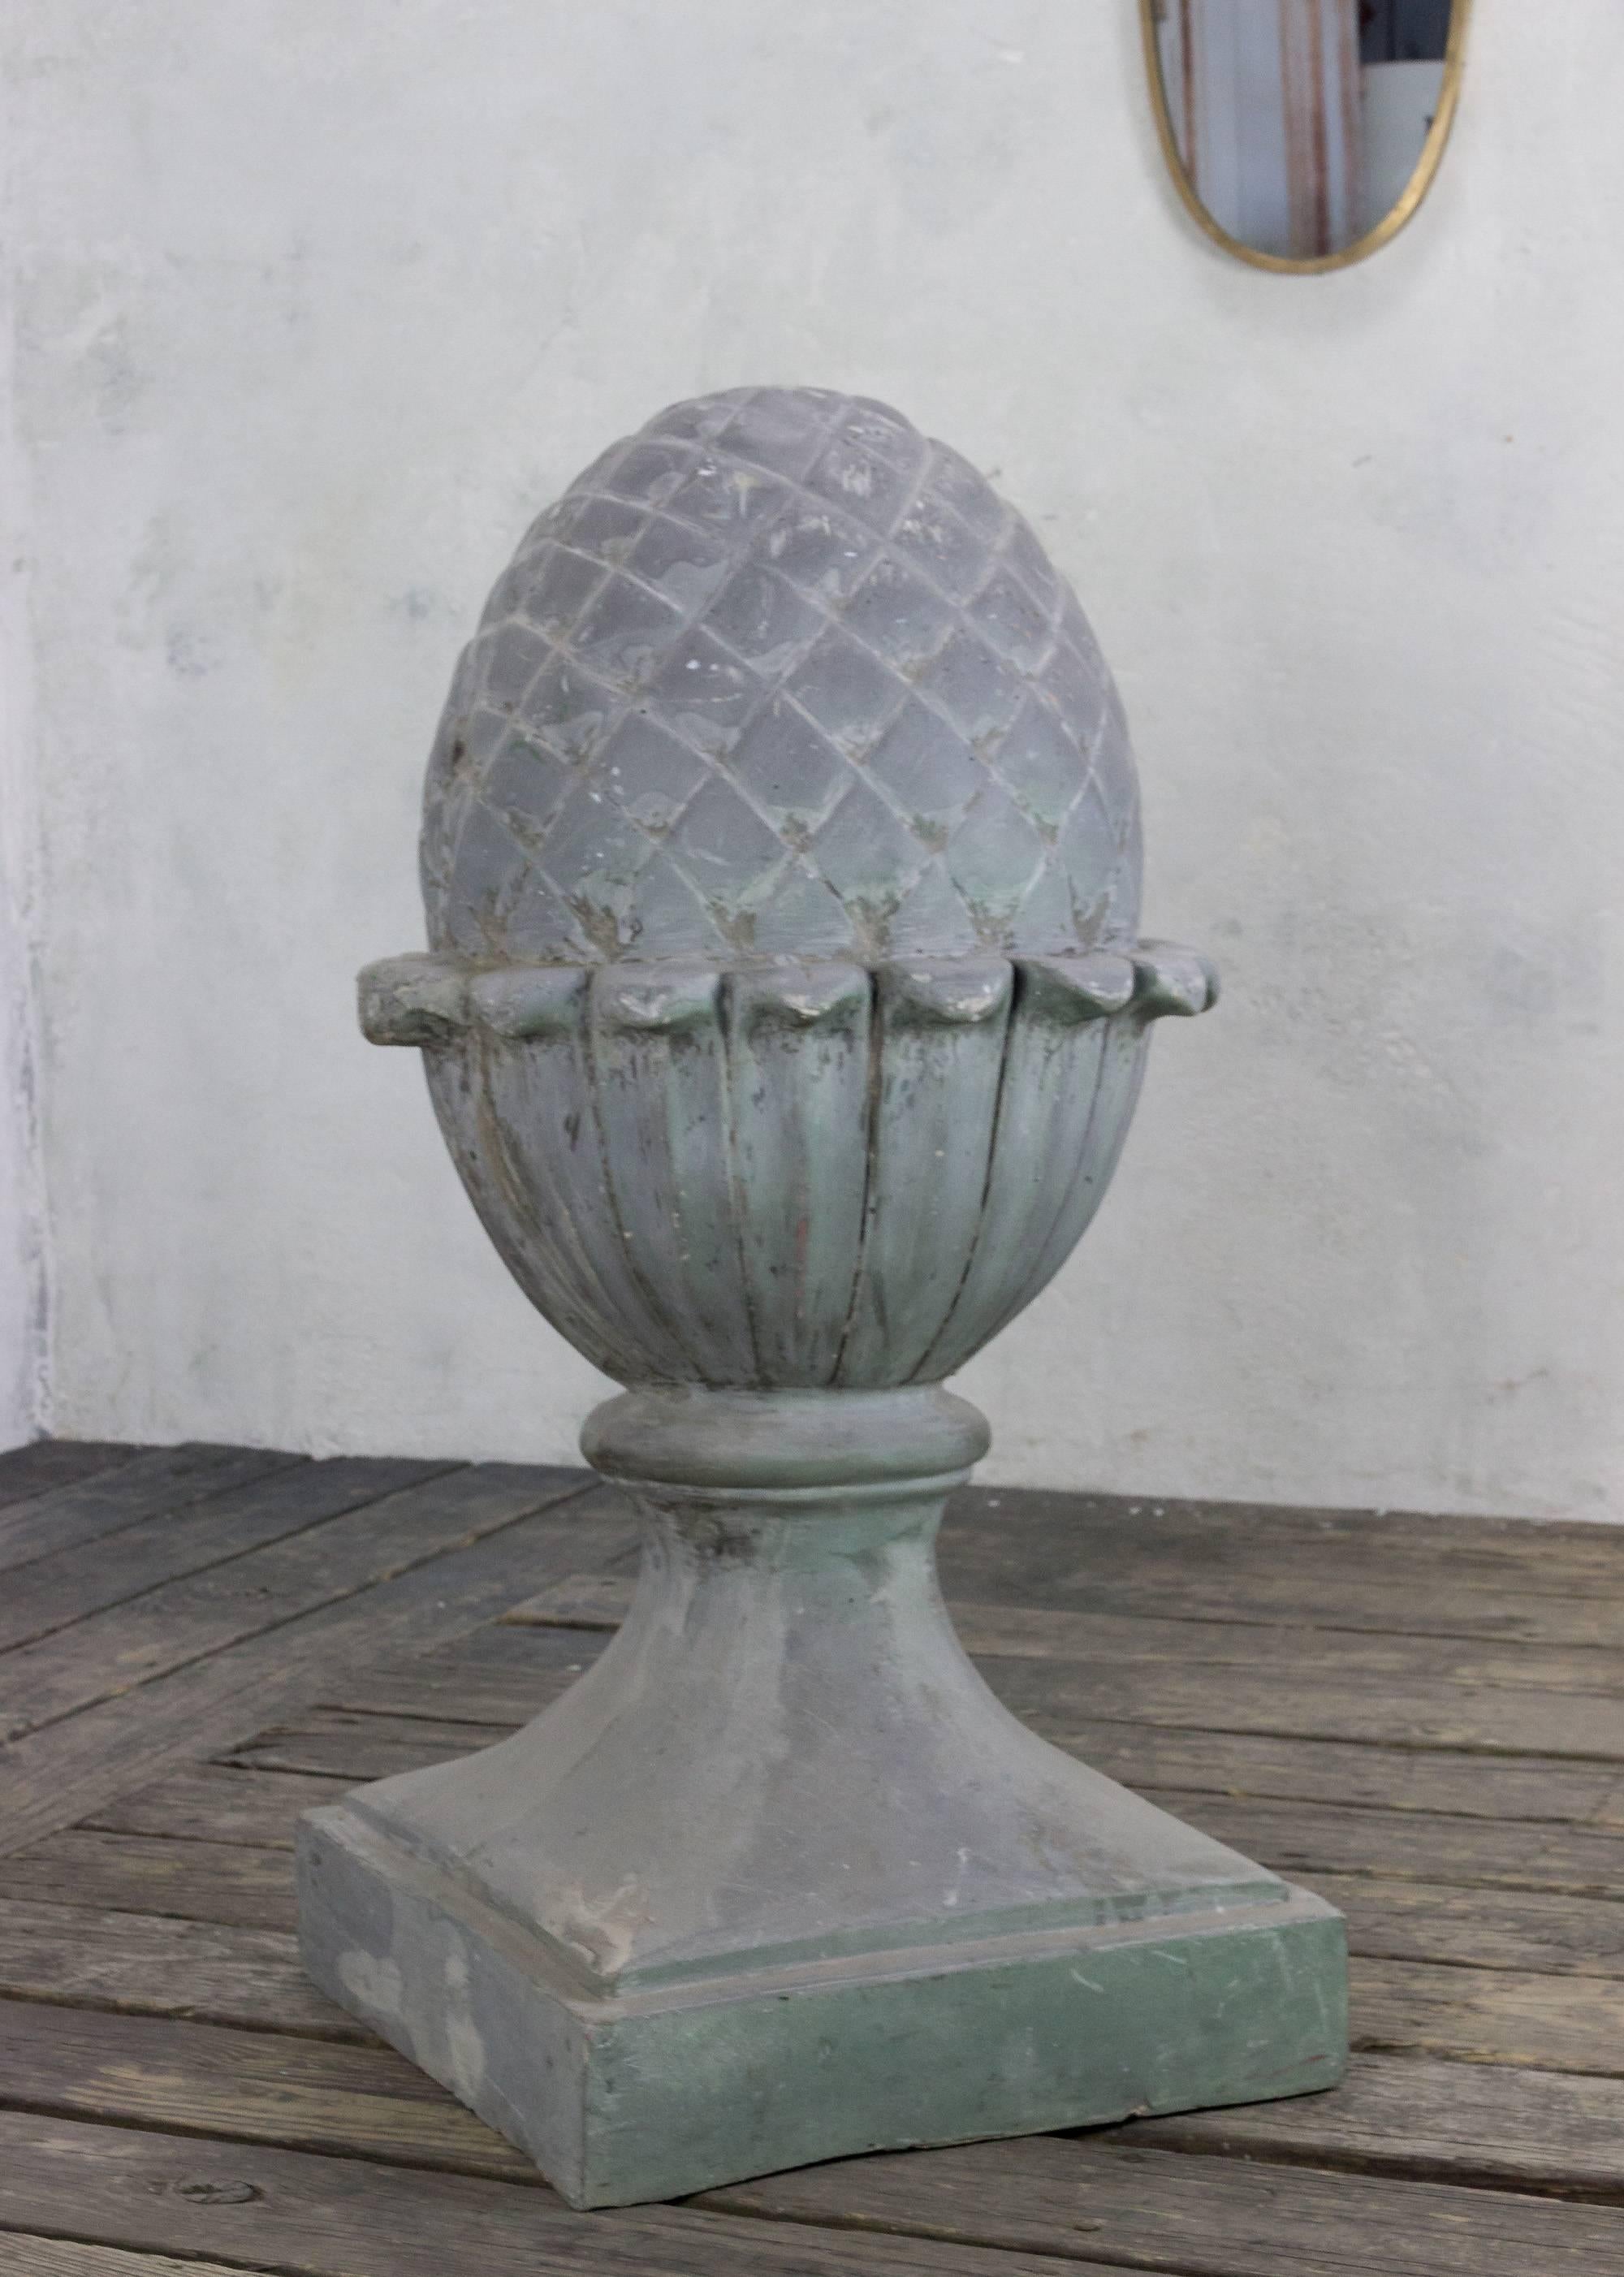 This fiberglass decoration in the shape of a pinecone is a truly interesting piece that is most likely a stage prop or a shop decoration. The piece is a beautiful representation of a stylized pinecone or acorn on a raised neoclassical base. Its